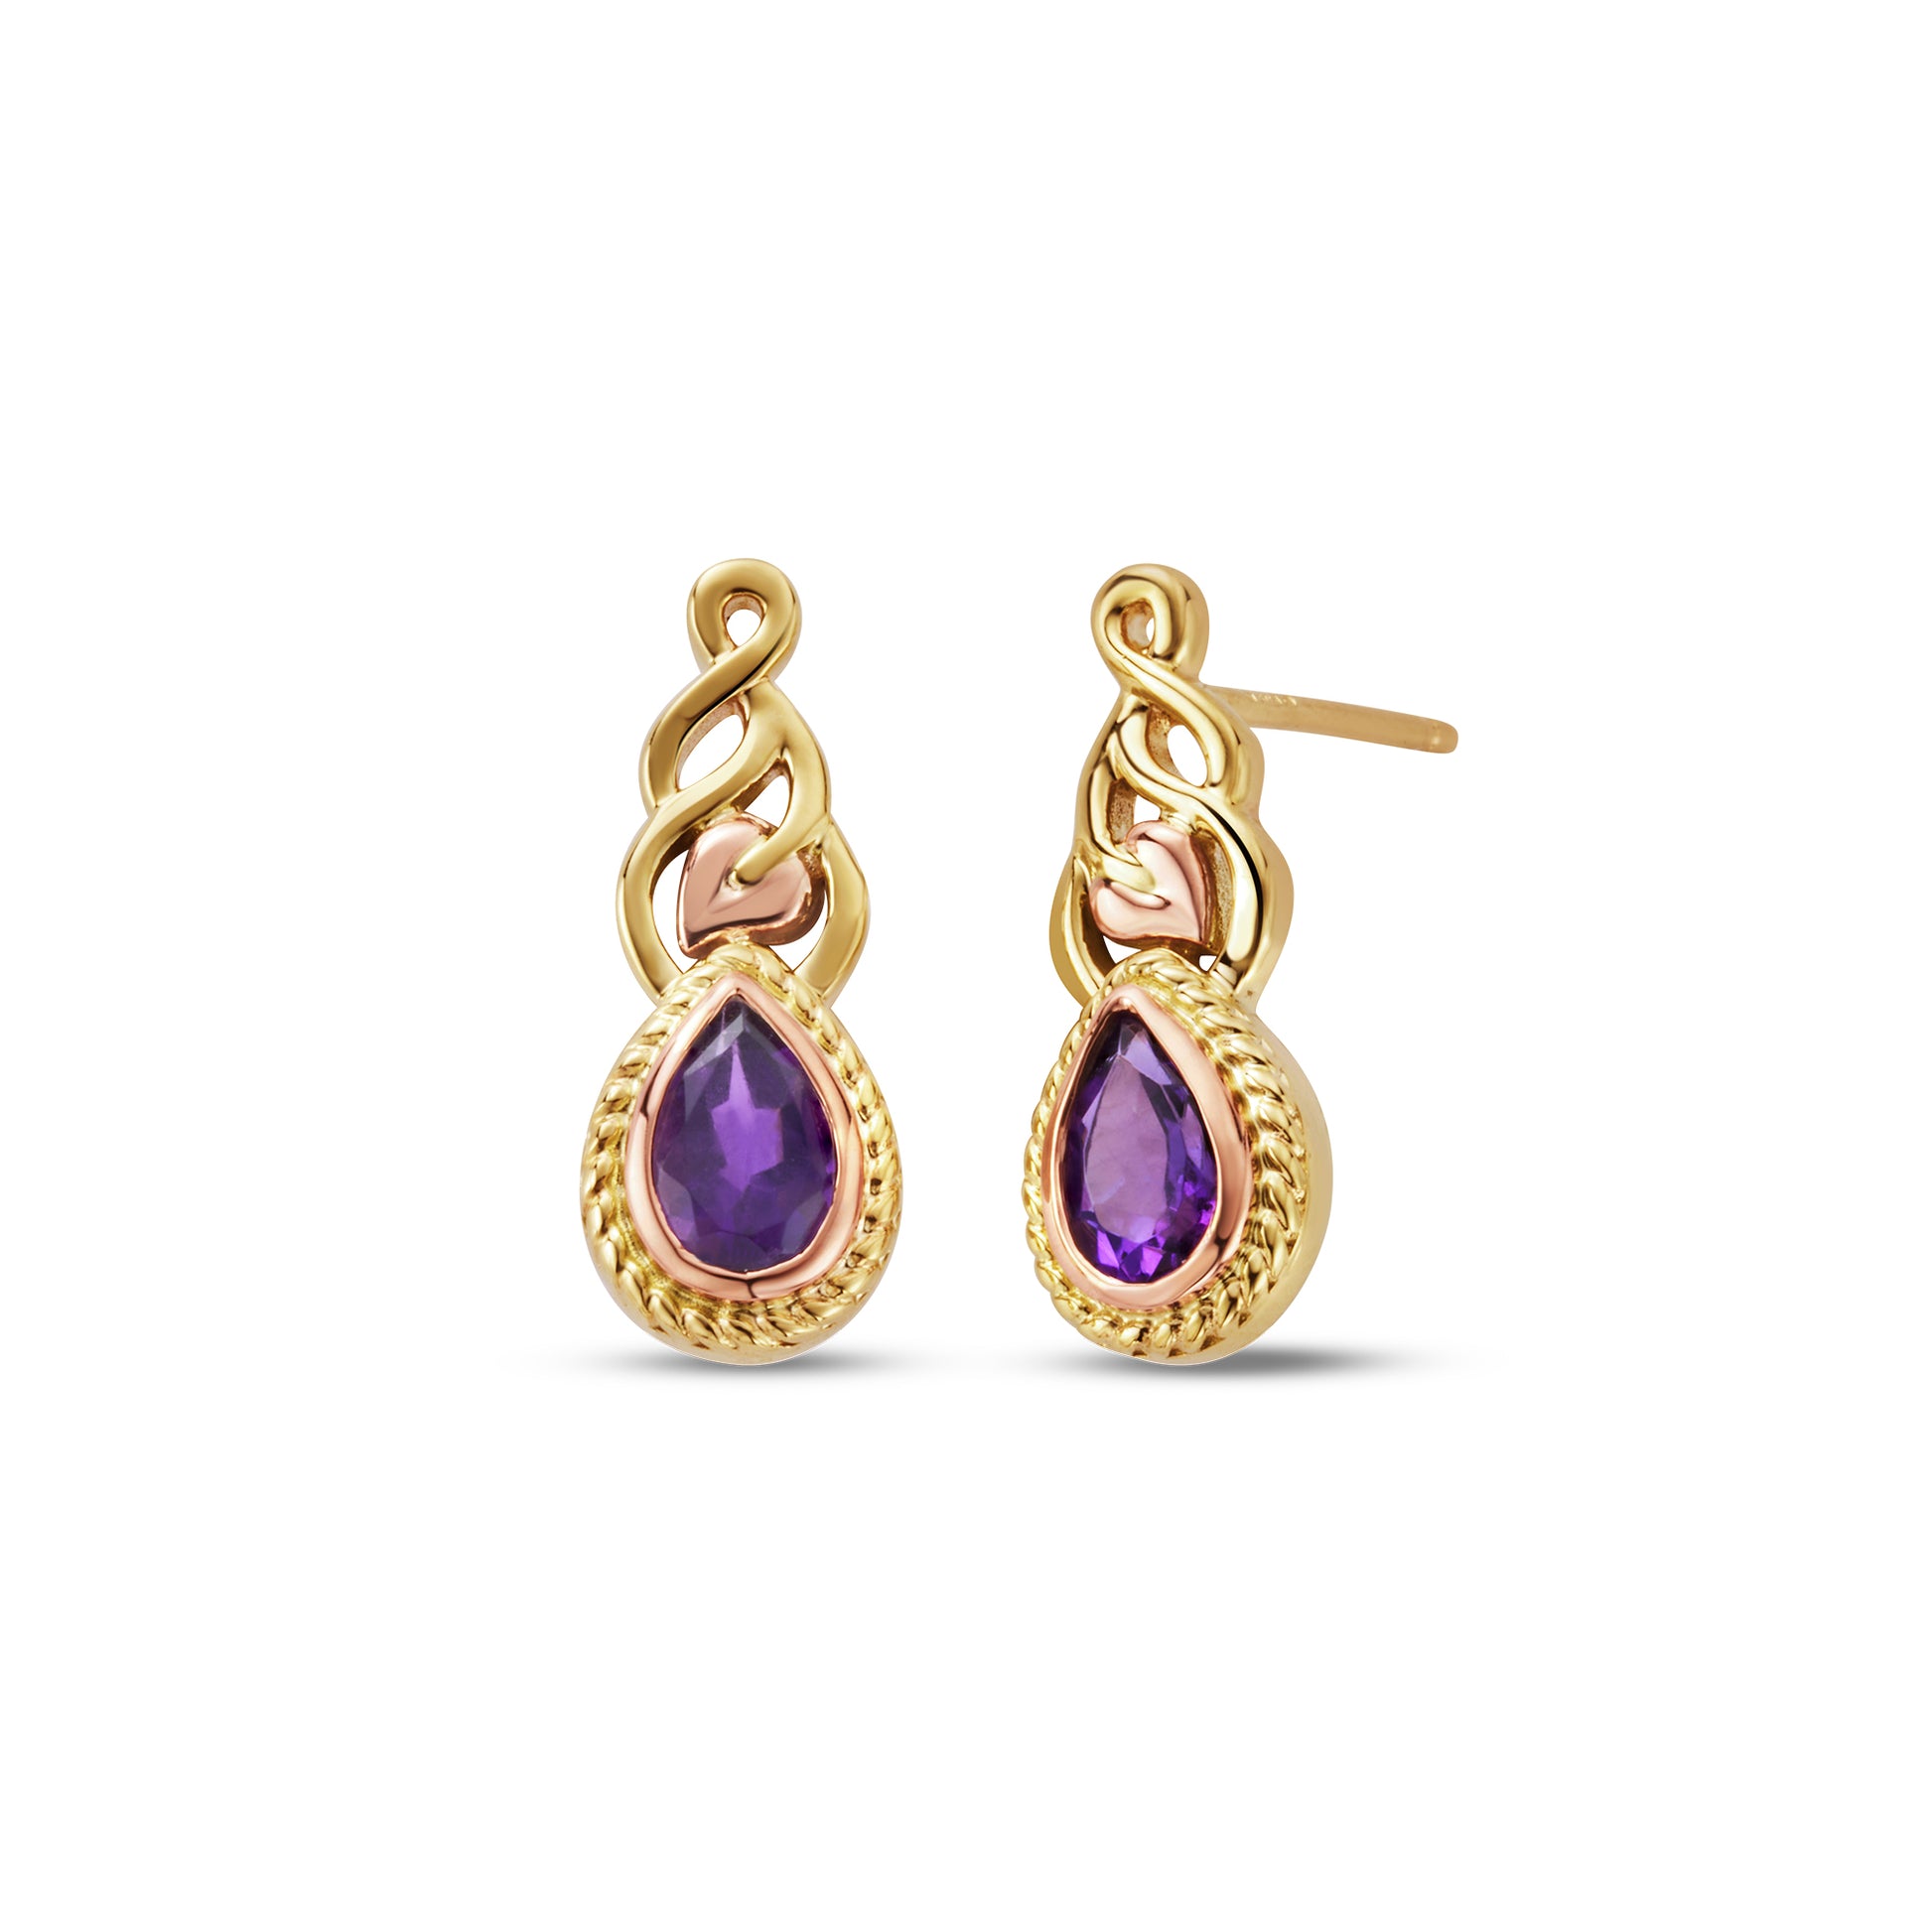 Delphinium Gold and Amethyst Earrings